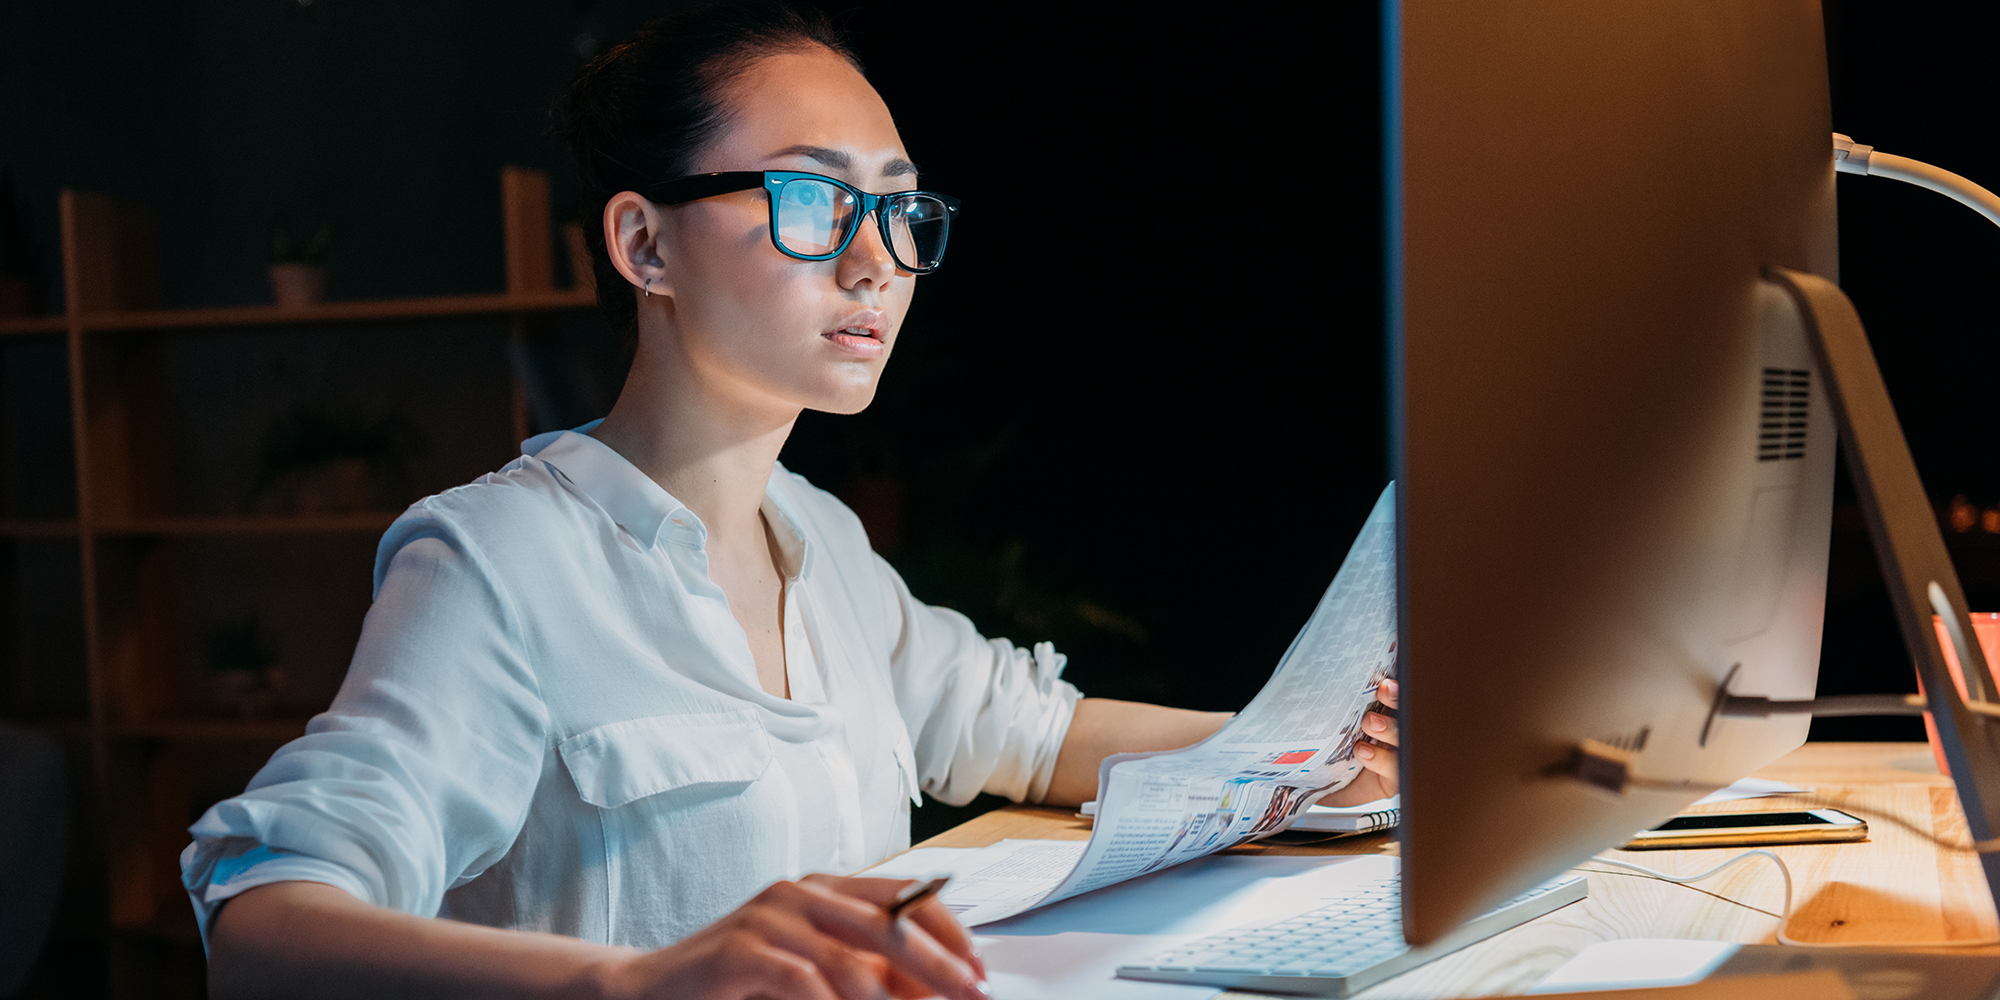 woman sitting in a dark room concentrating t something on her computer screen